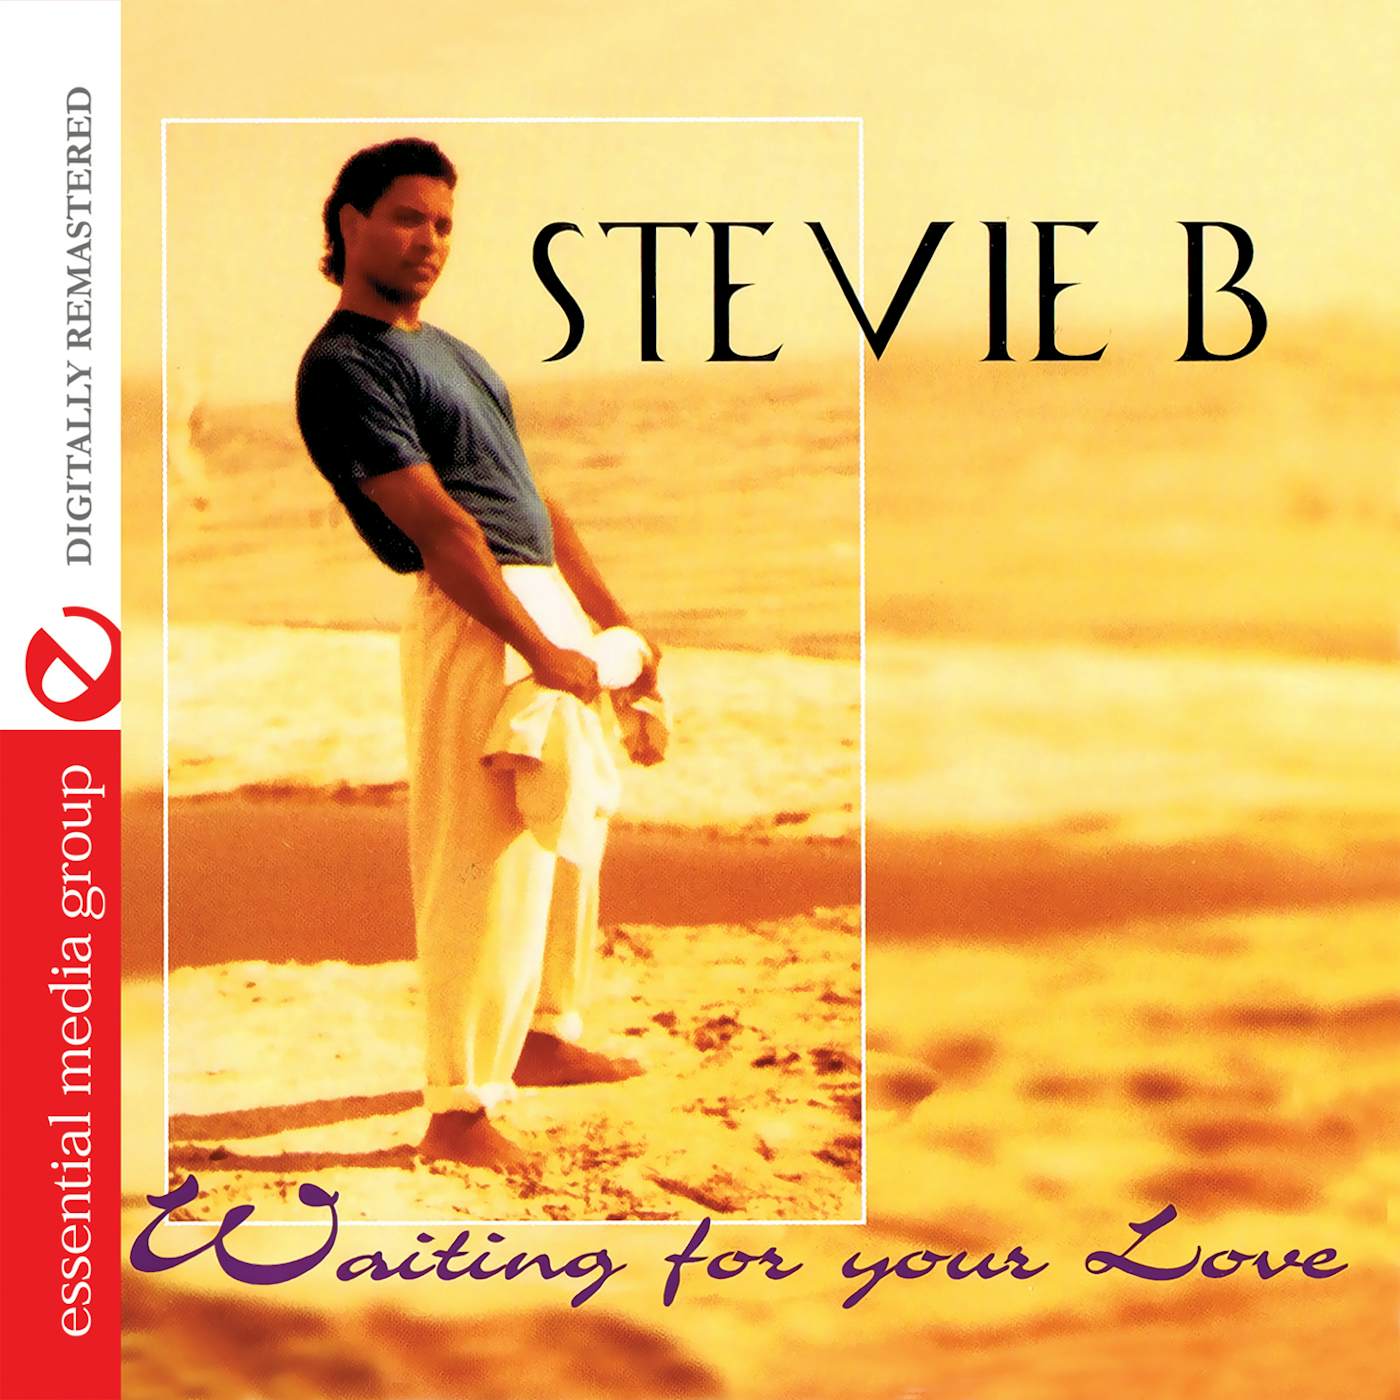 Stevie B WAITING FOR YOUR LOVE CD